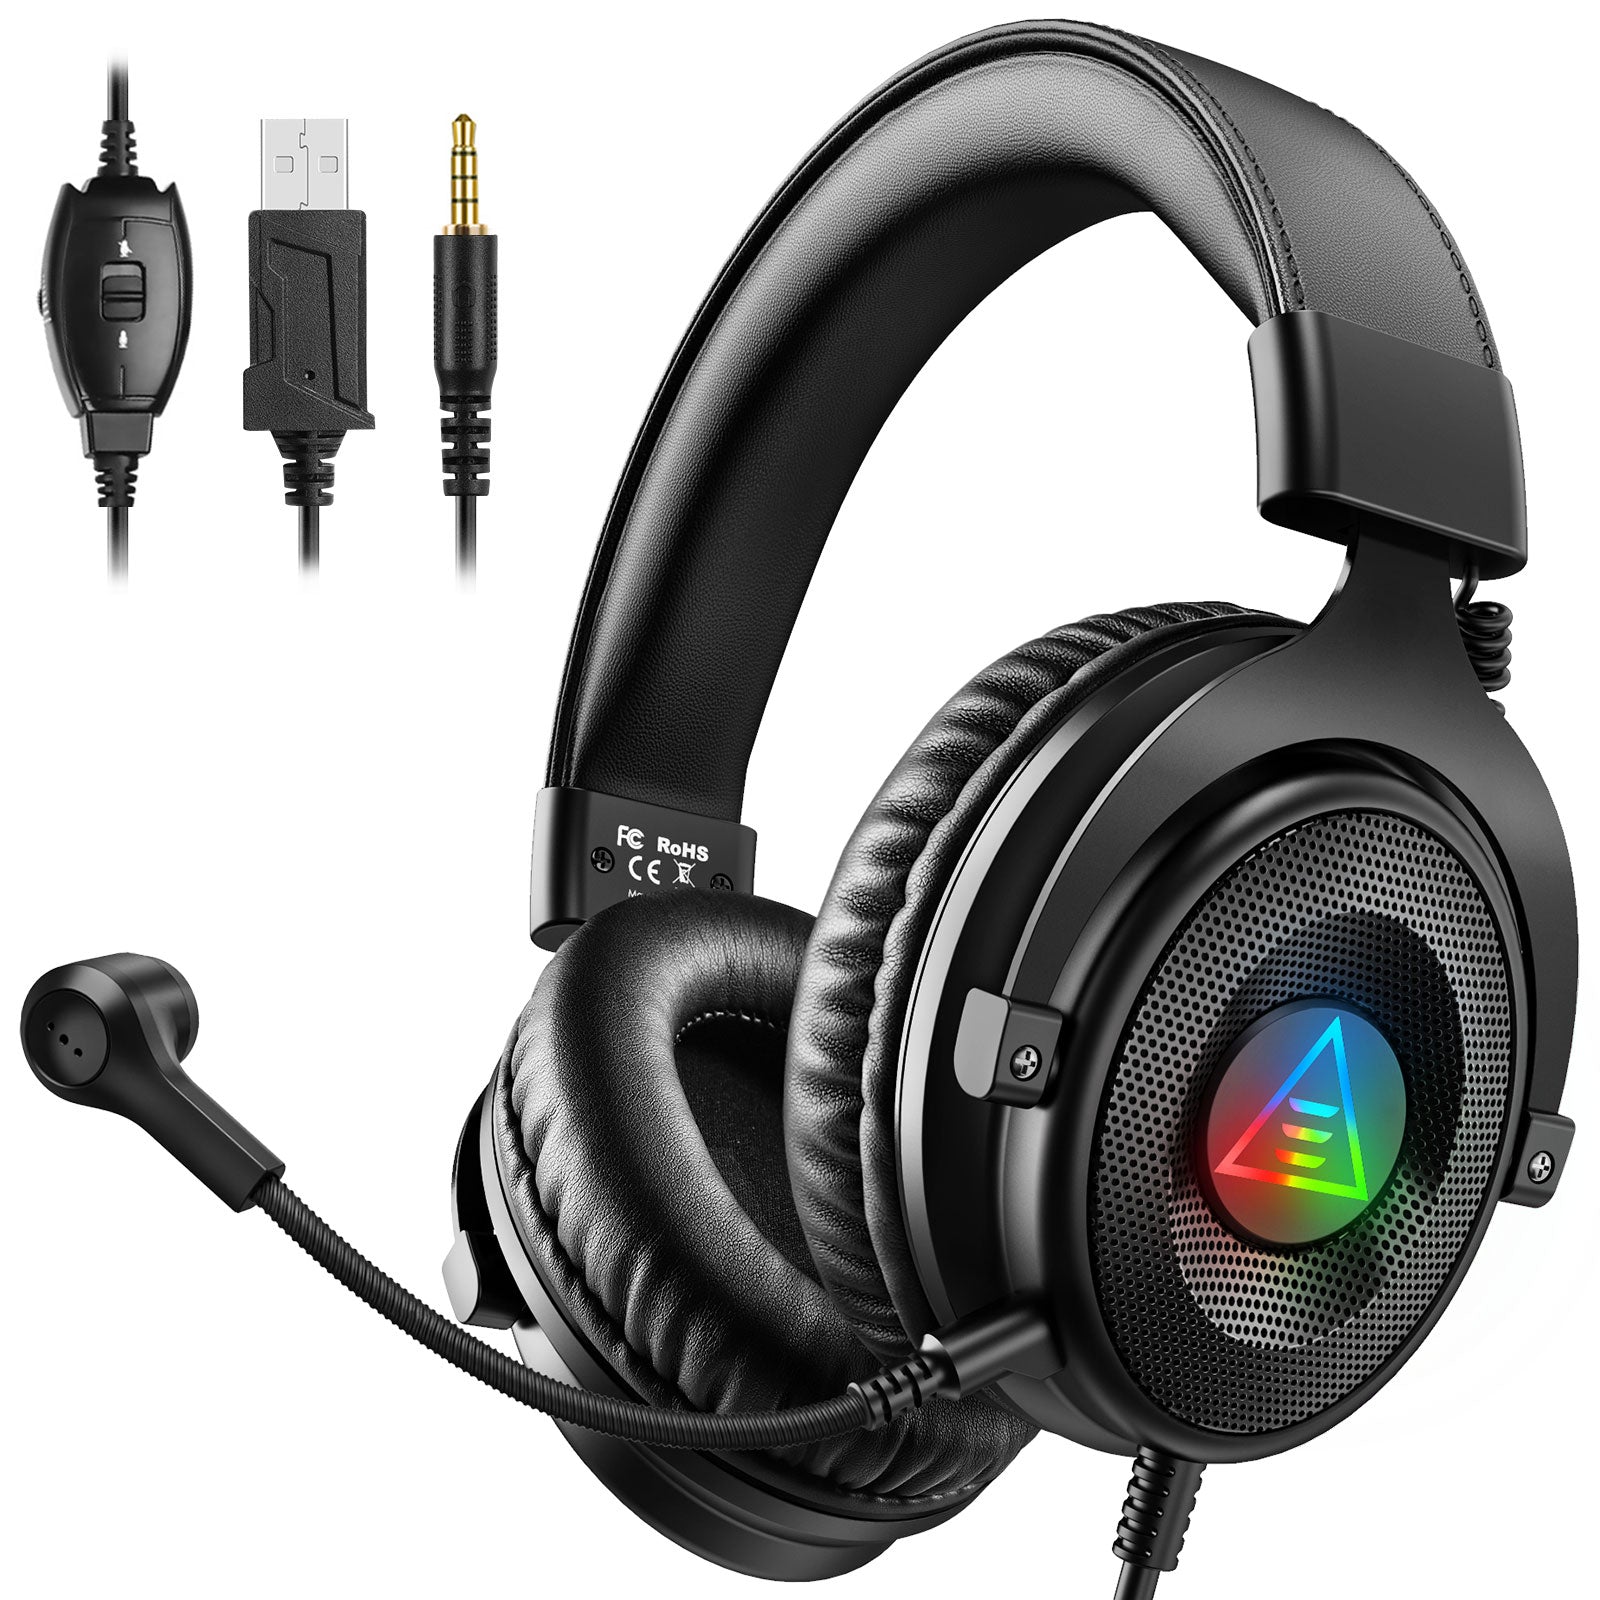 E900DL Wired Stereo Gaming Headset-Over Ear Headphones